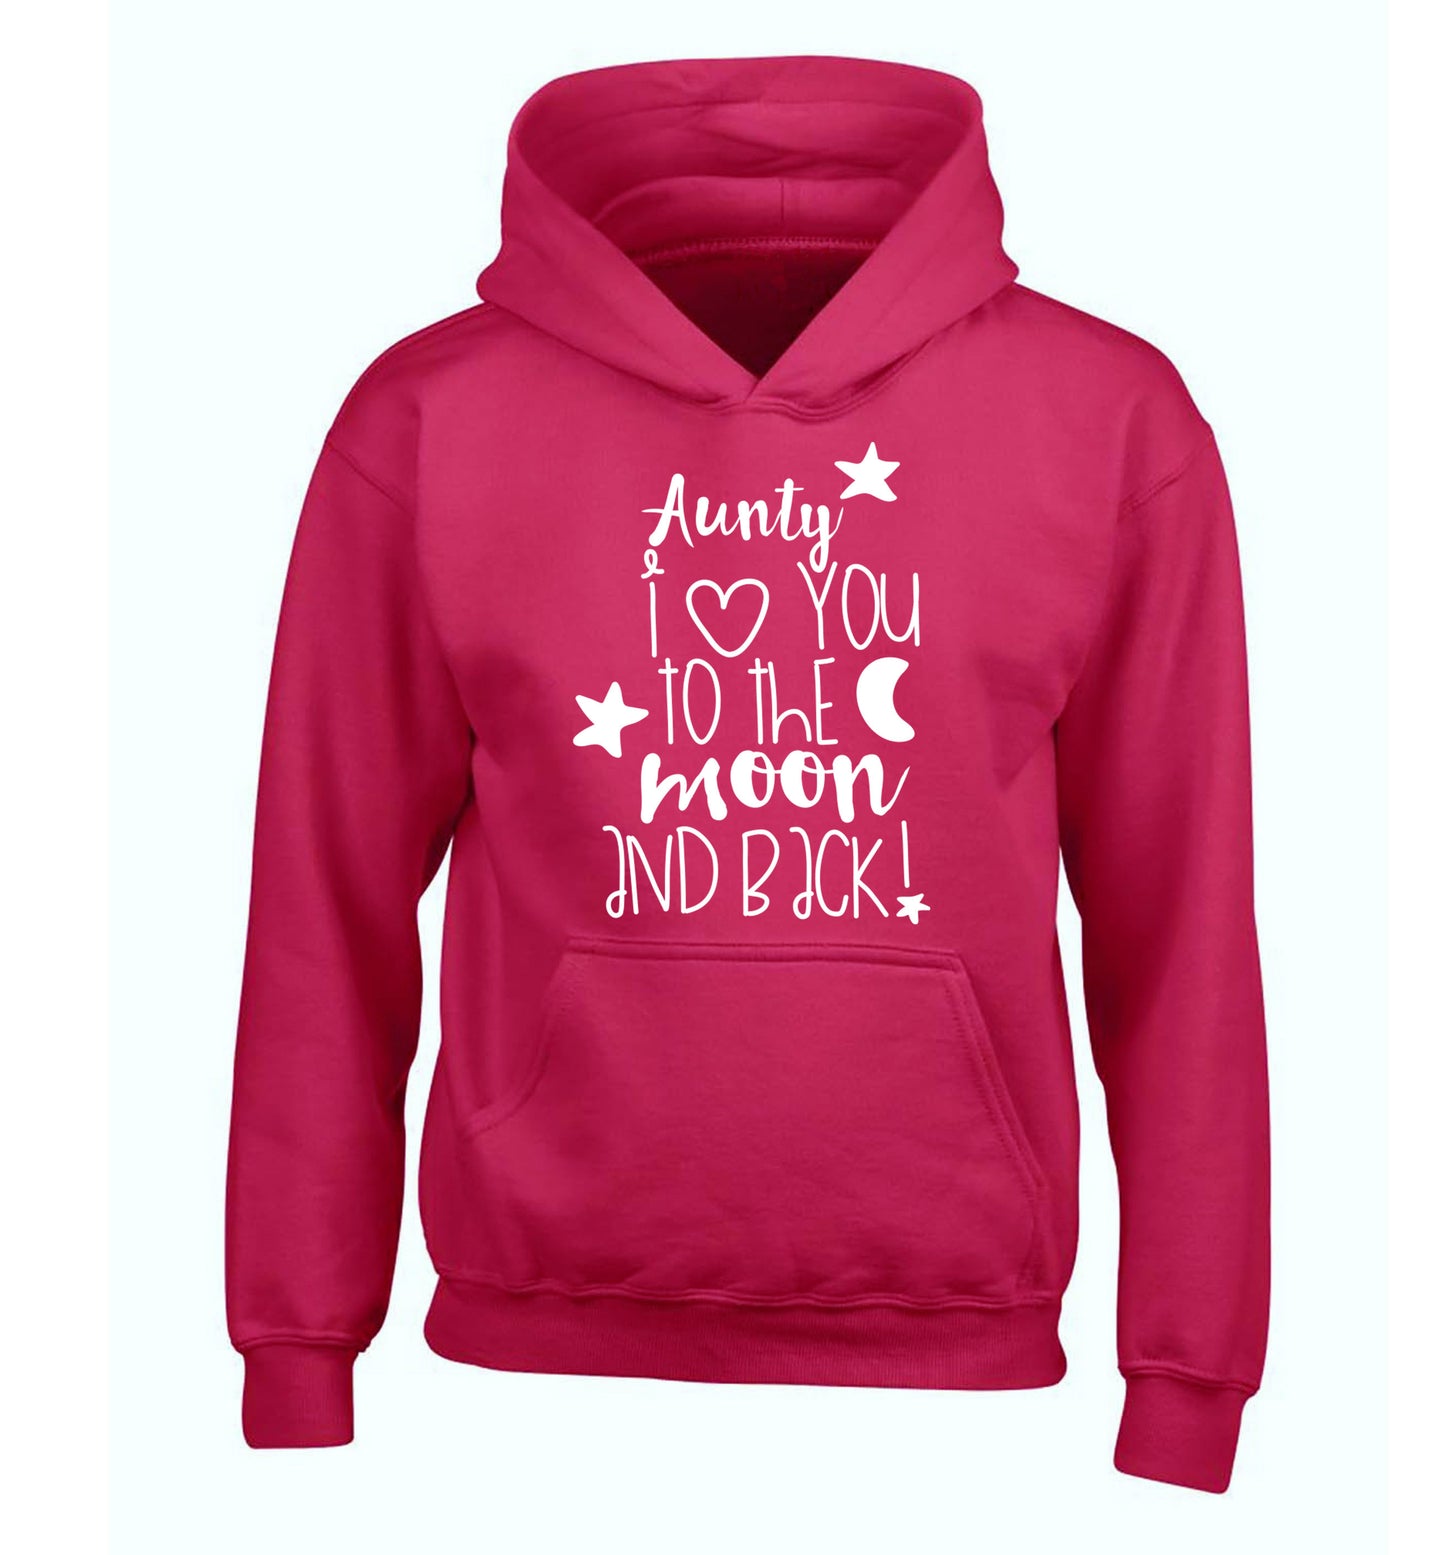 Aunty I love you to the moon and back children's pink hoodie 12-14 Years